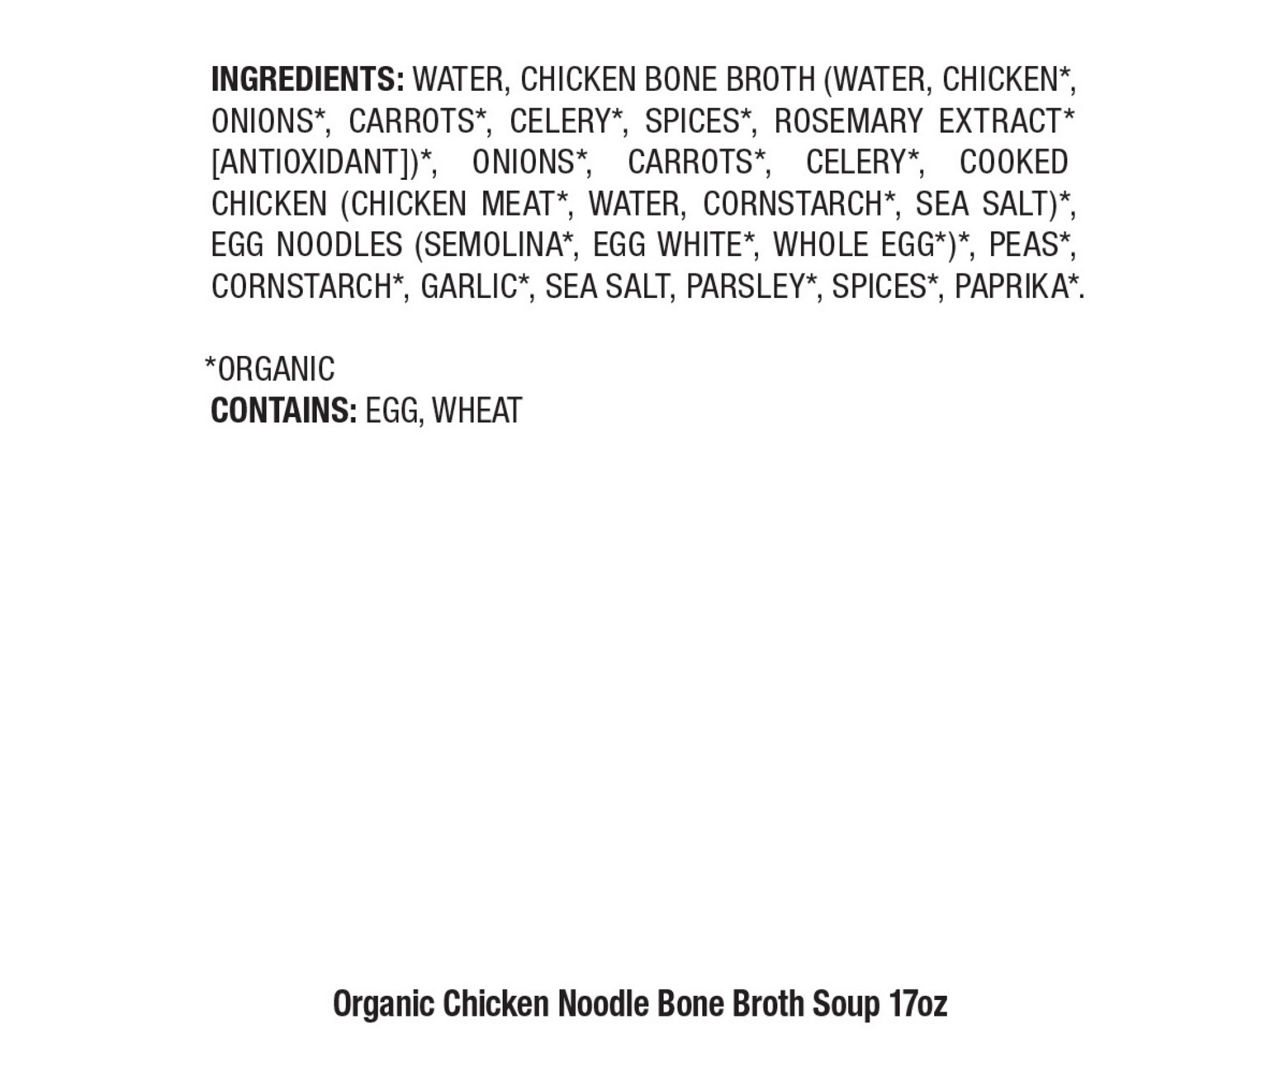 Pacific Foods Organic Chicken Noodle Soup With Bone Broth - 17oz